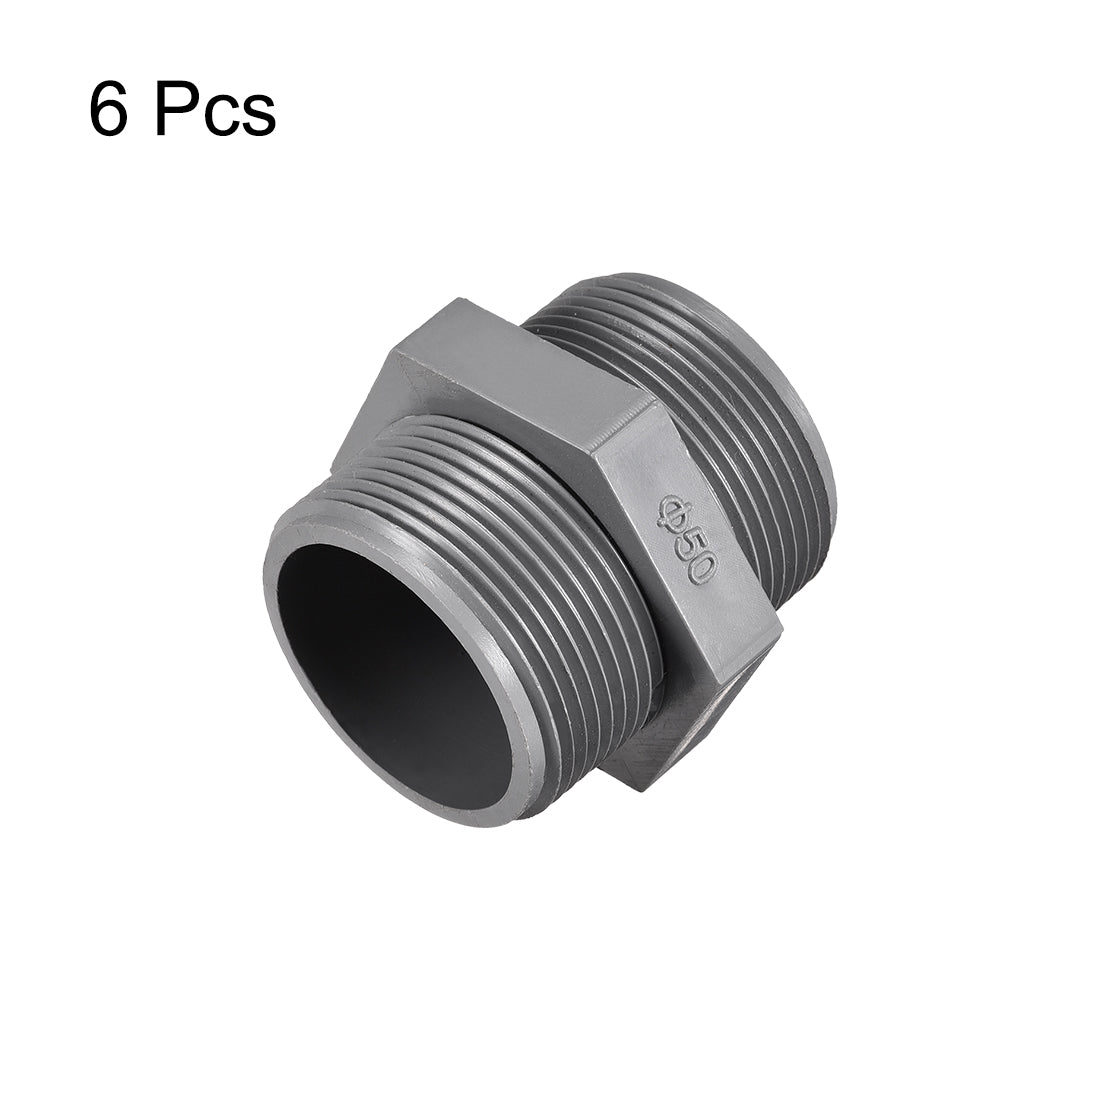 uxcell Uxcell Pipe Fittings Connector G1-1/2 Male Thread Adapter Plastic Hex Connector 6pcs